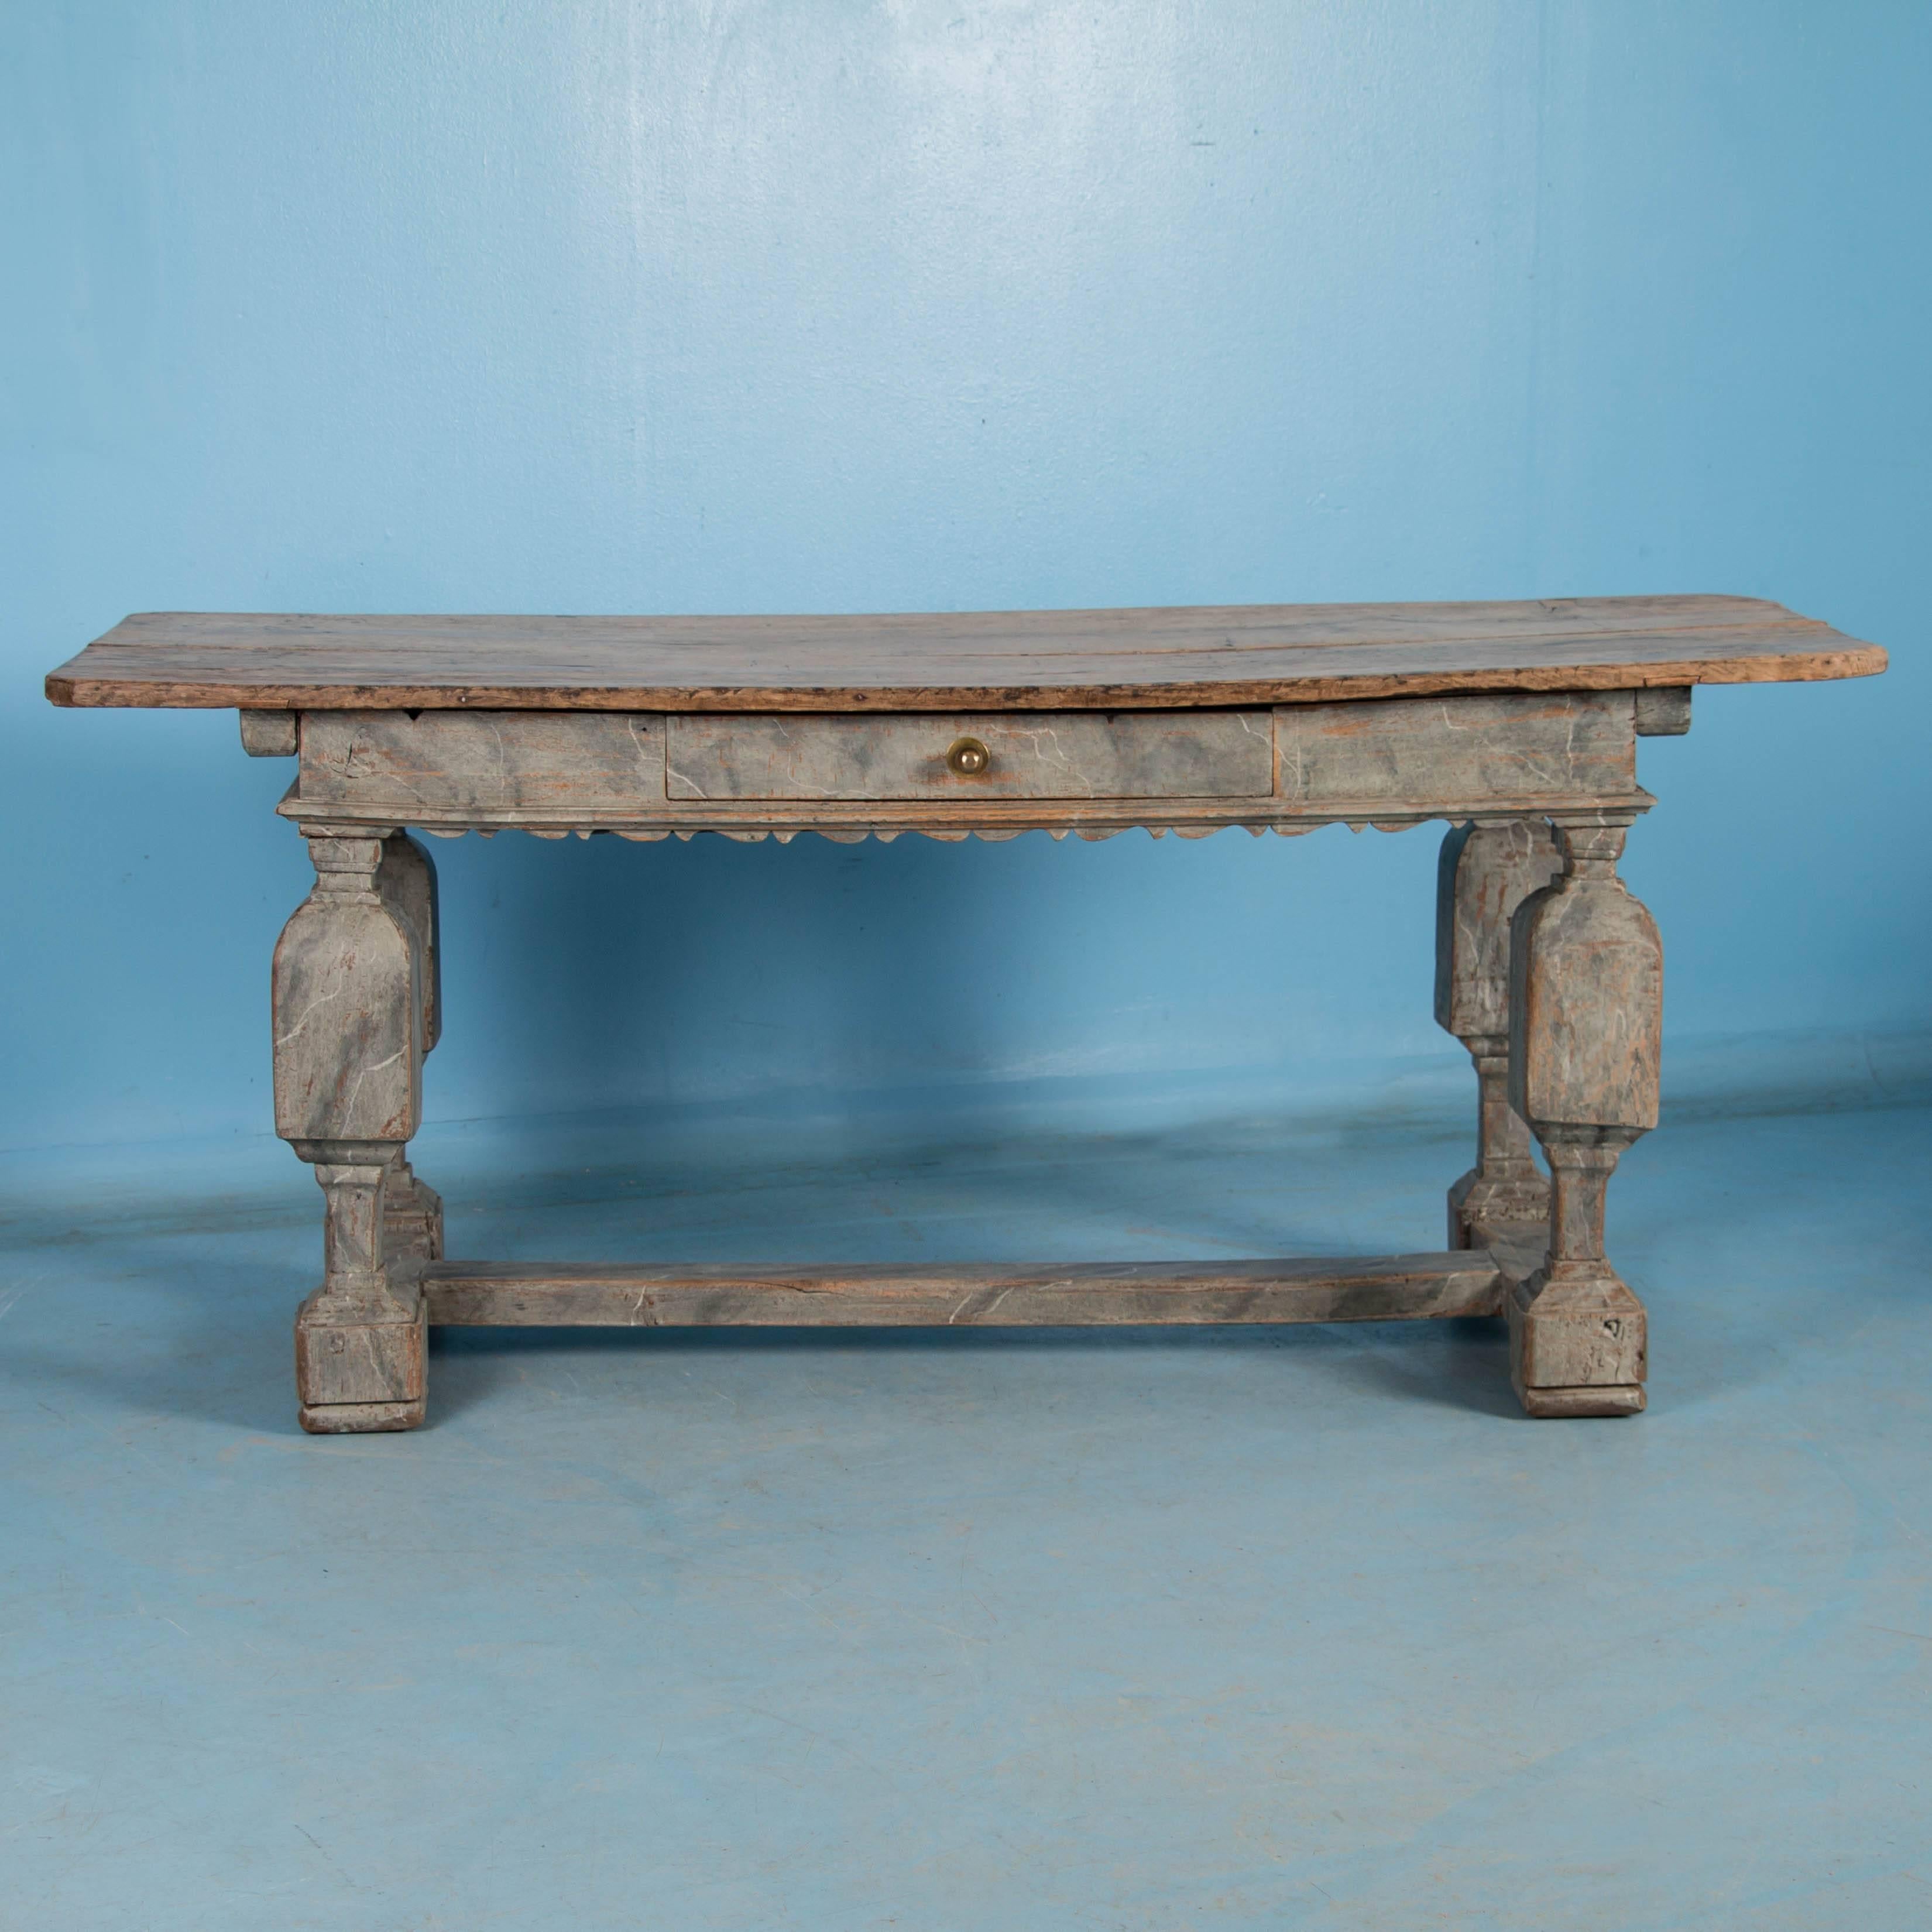 This remarkable baroque farm table maintains the grace and enduring style of over 200 years of use. The lovely grey/blue marbled paint is a traditional finish and has an amazing patina due to the wear through the years. The oak top has been left raw